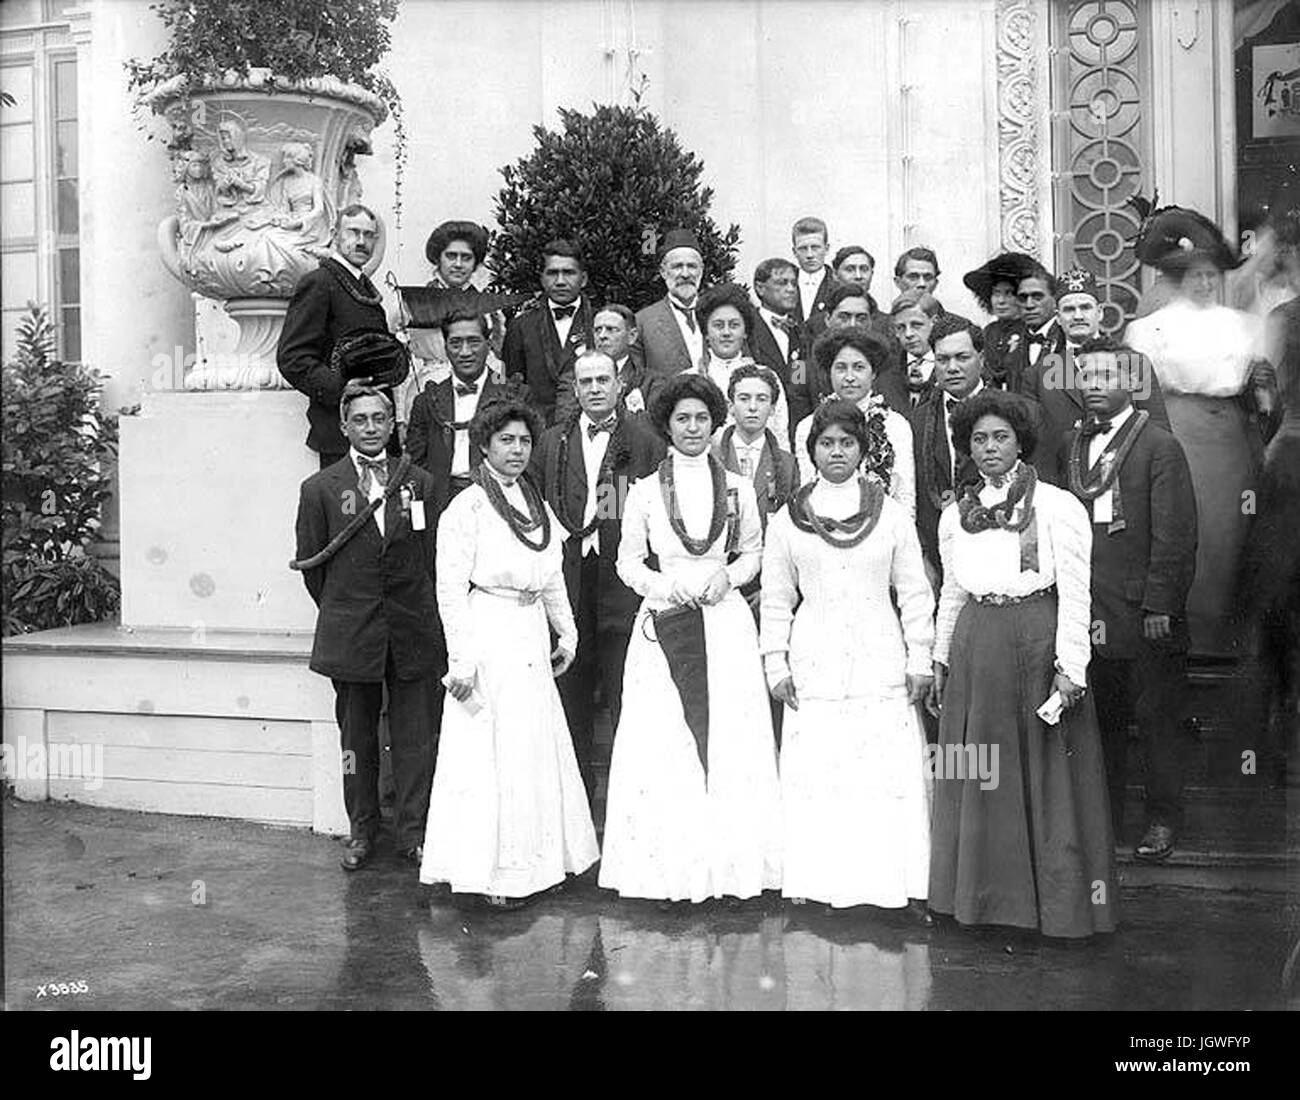 Alaska-Yukon-Pacific Exposition in Seattle, 1909 - Hawaiian officials, hostesses, and musicians in front of the Hawaii Building Stock Photo